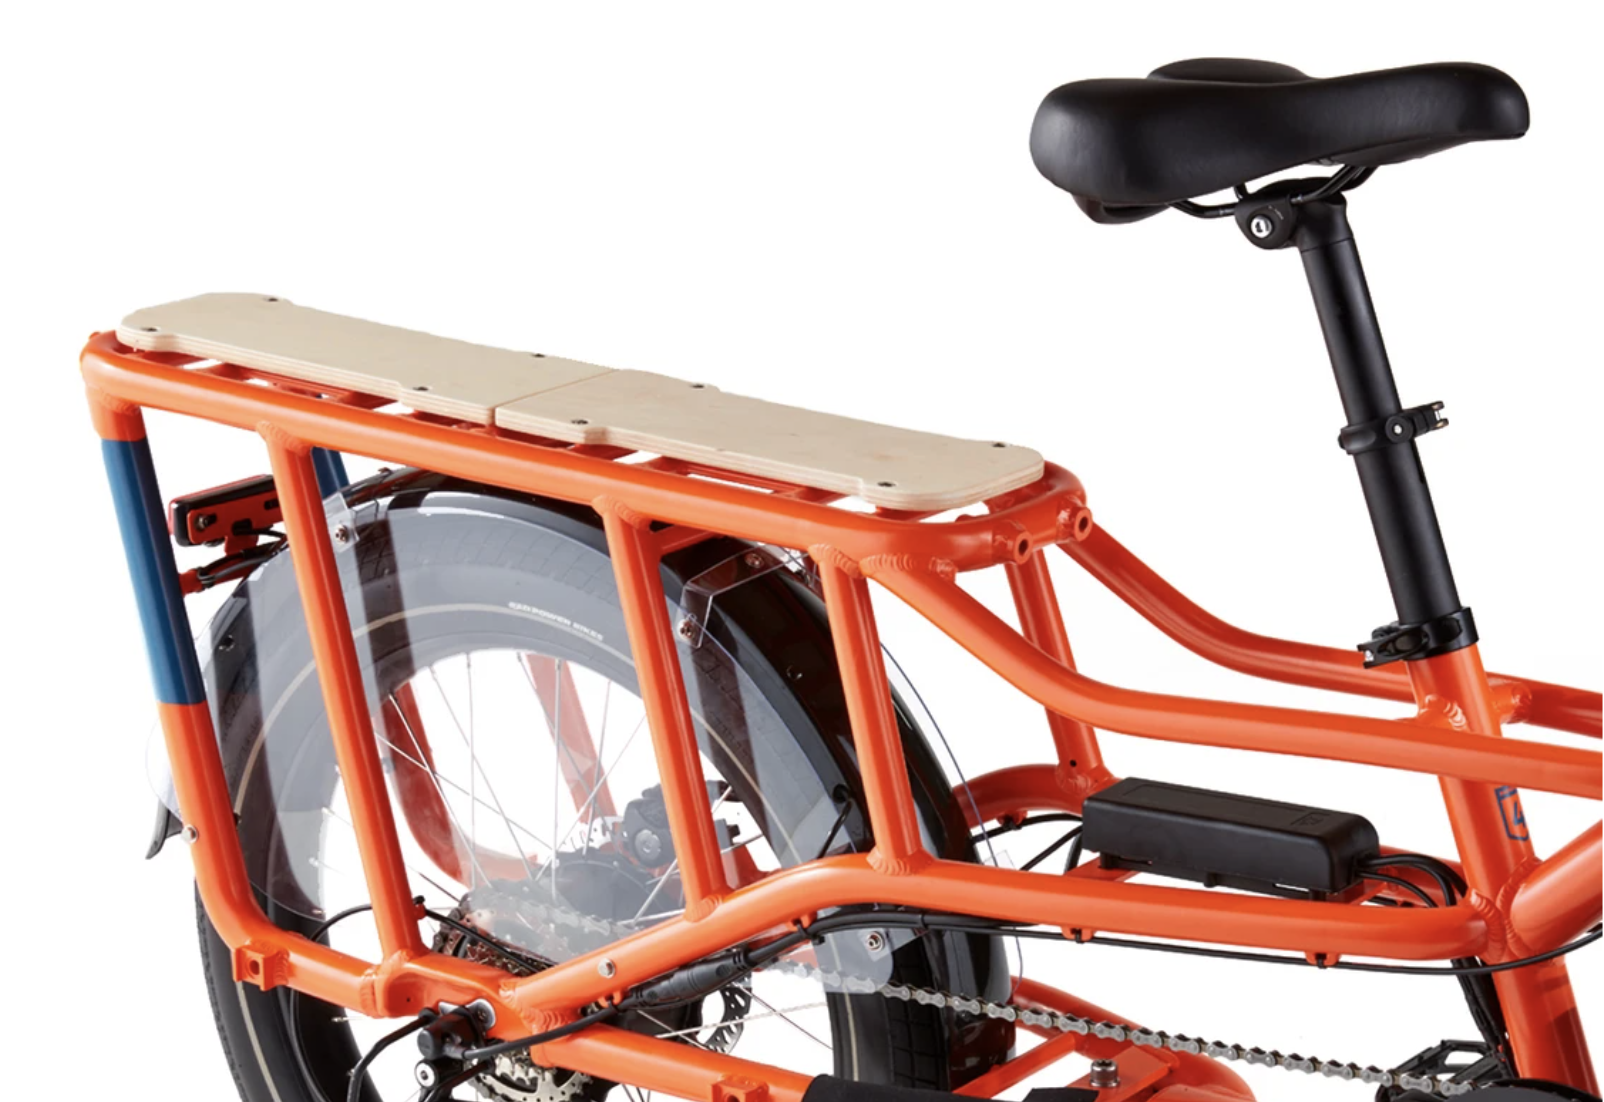 Orange electric bike with rear rack to carry groceries and other items.